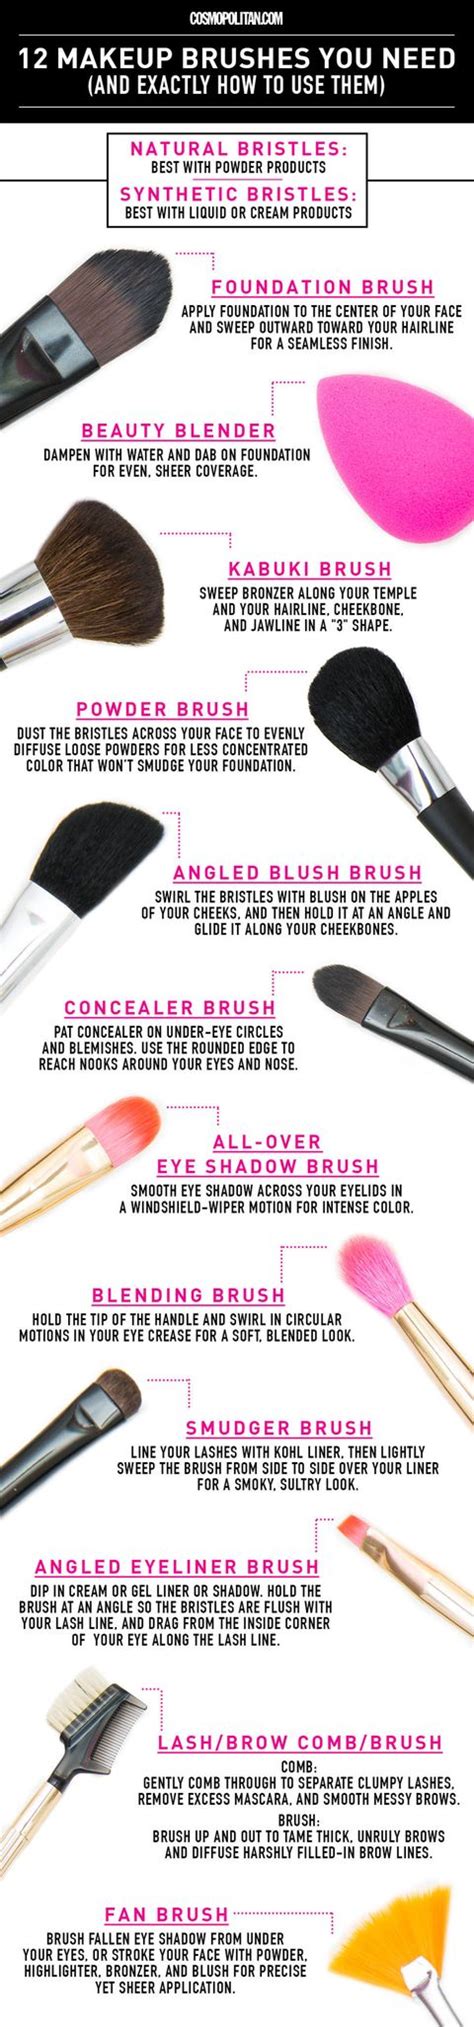 12 makeup brushes you need and how to use them build